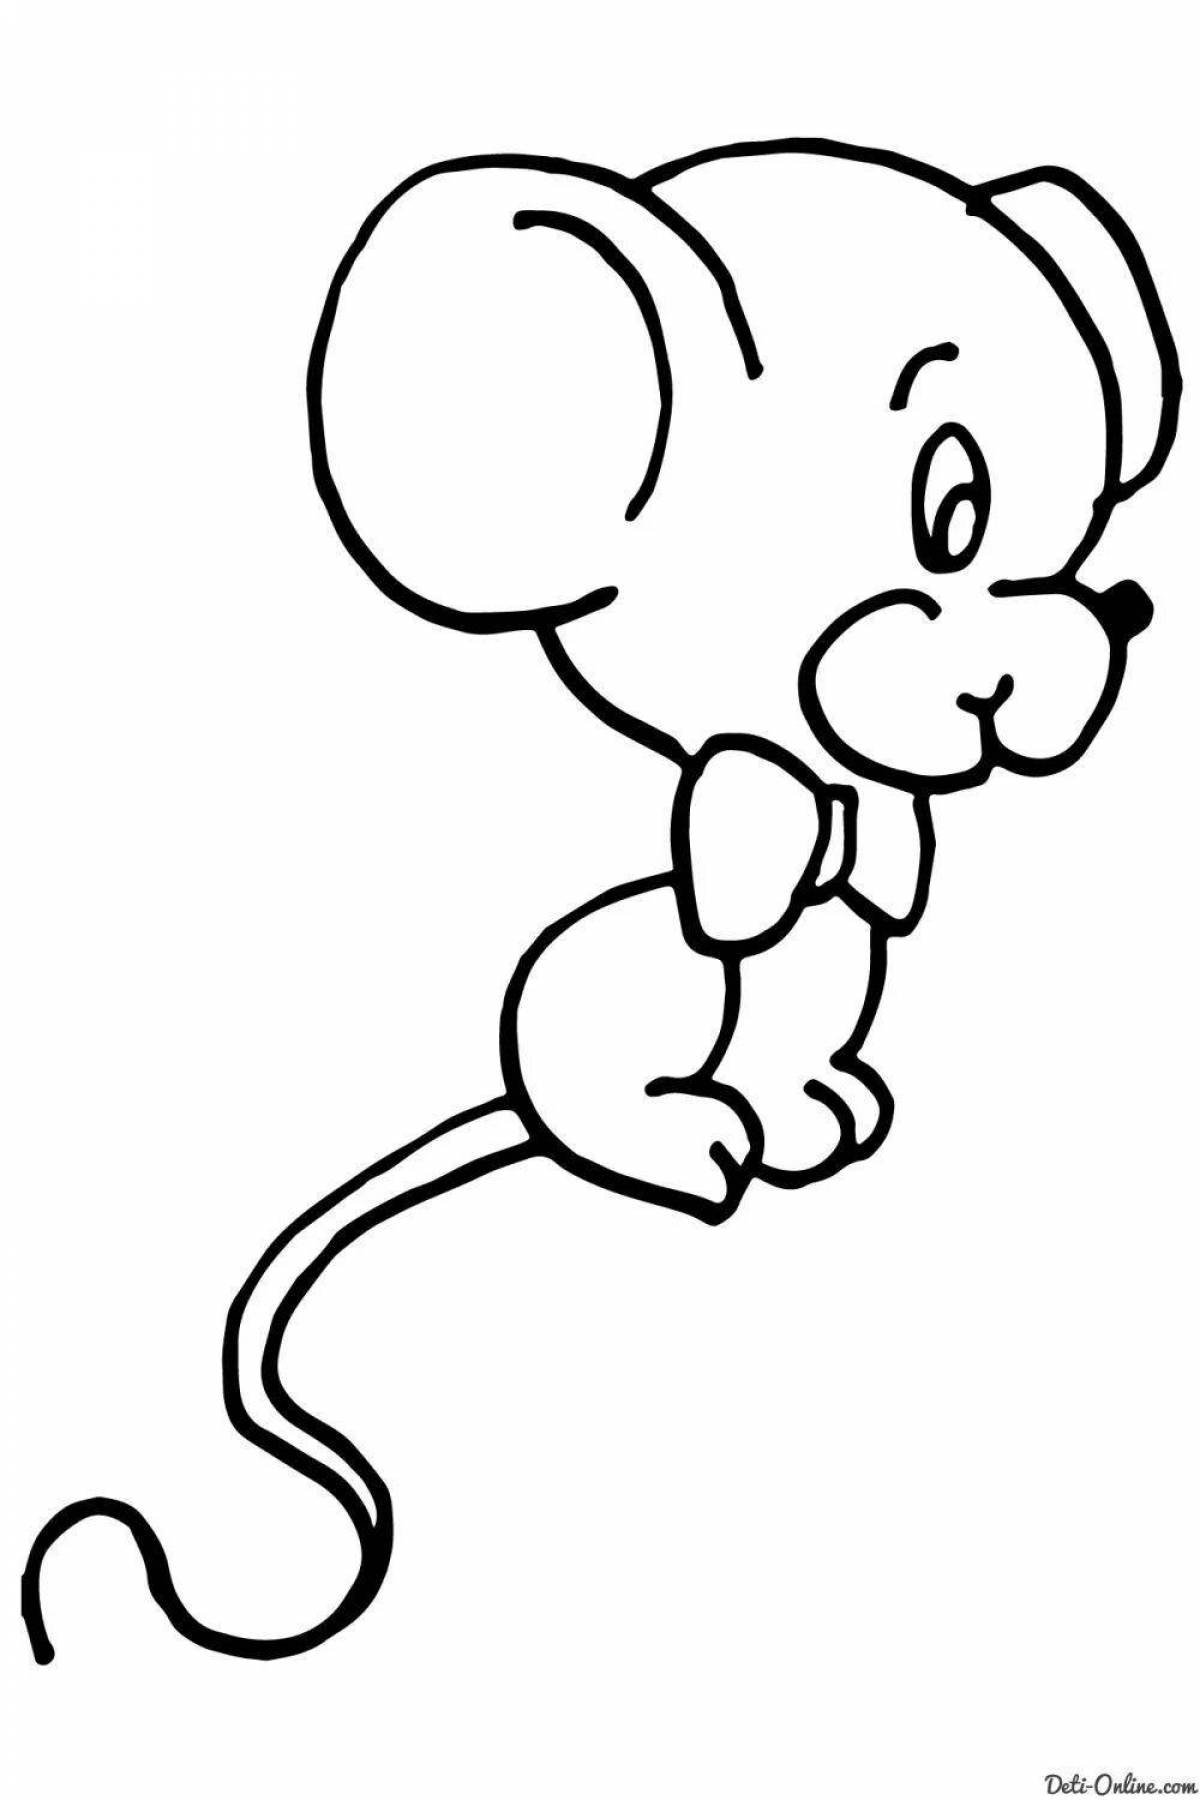 Animated drawing of a mouse